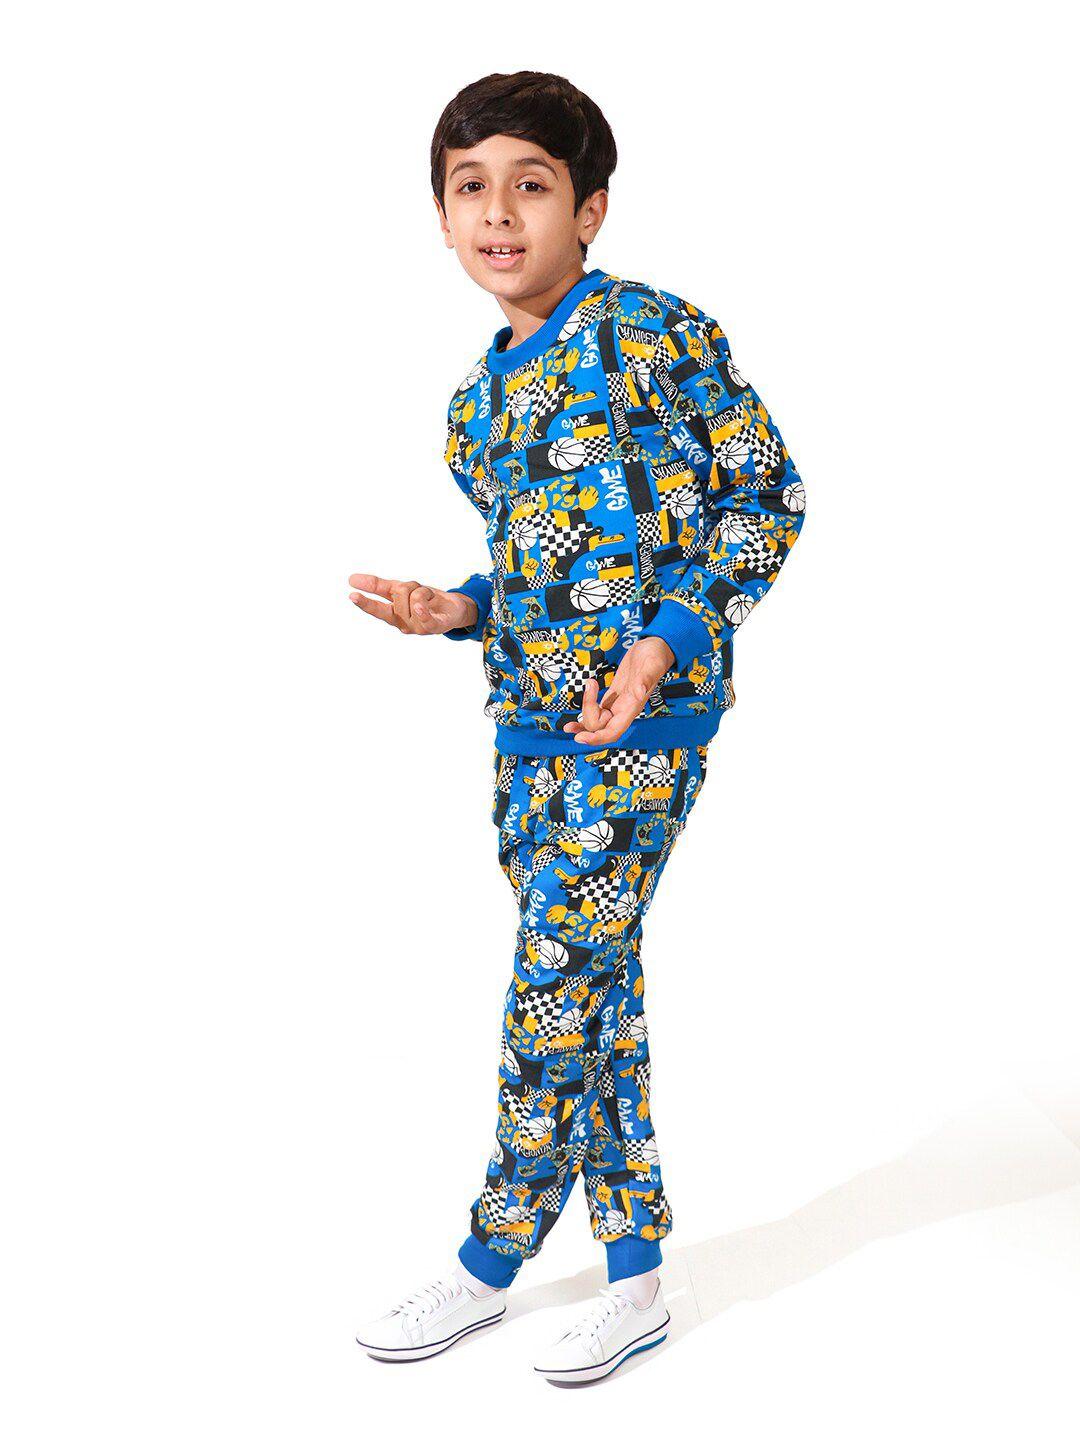 whistle-&-hops-boys-blue-&-yellow-printed-t-shirt-with-pyjamas